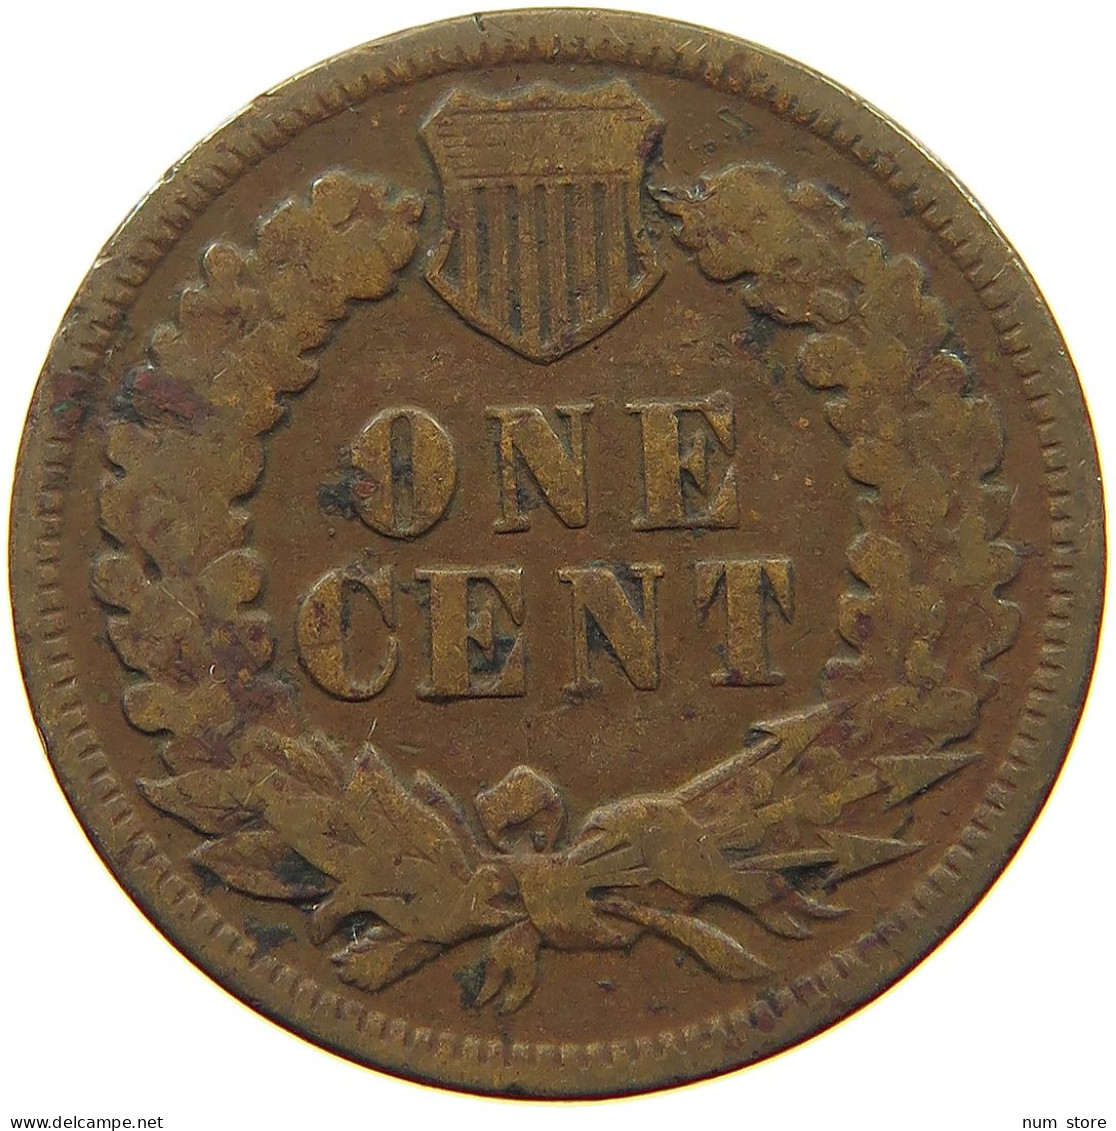 UNITED STATES OF AMERICA CENT 1900 INDIAN HEAD #s063 0311 - 1859-1909: Indian Head